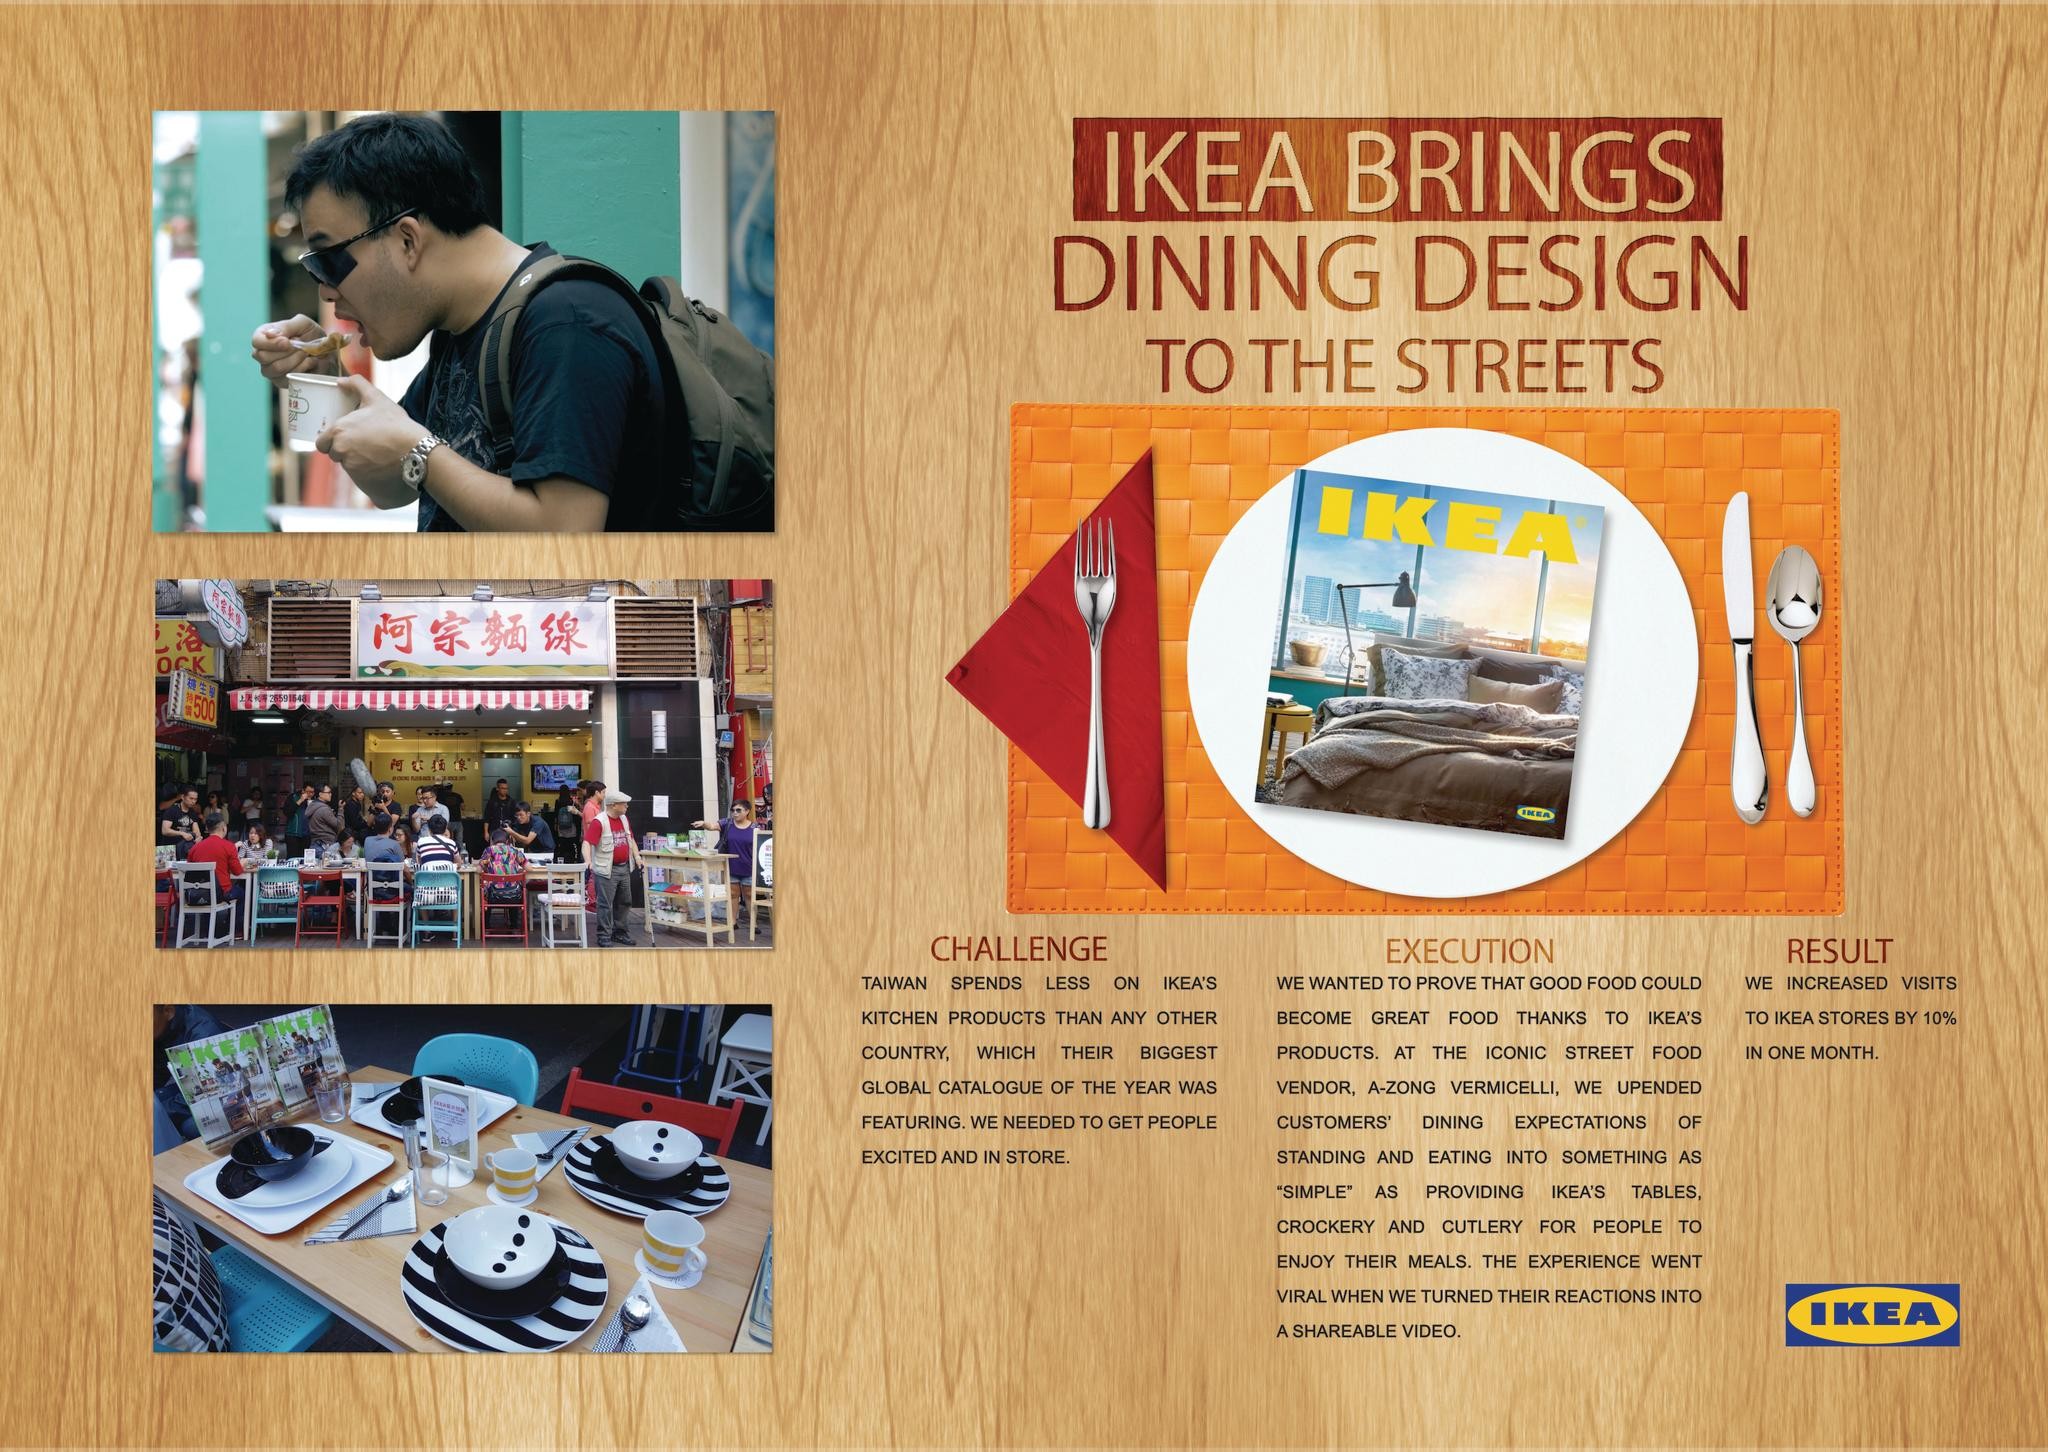 IKEA Brings Dining Design to the Streets